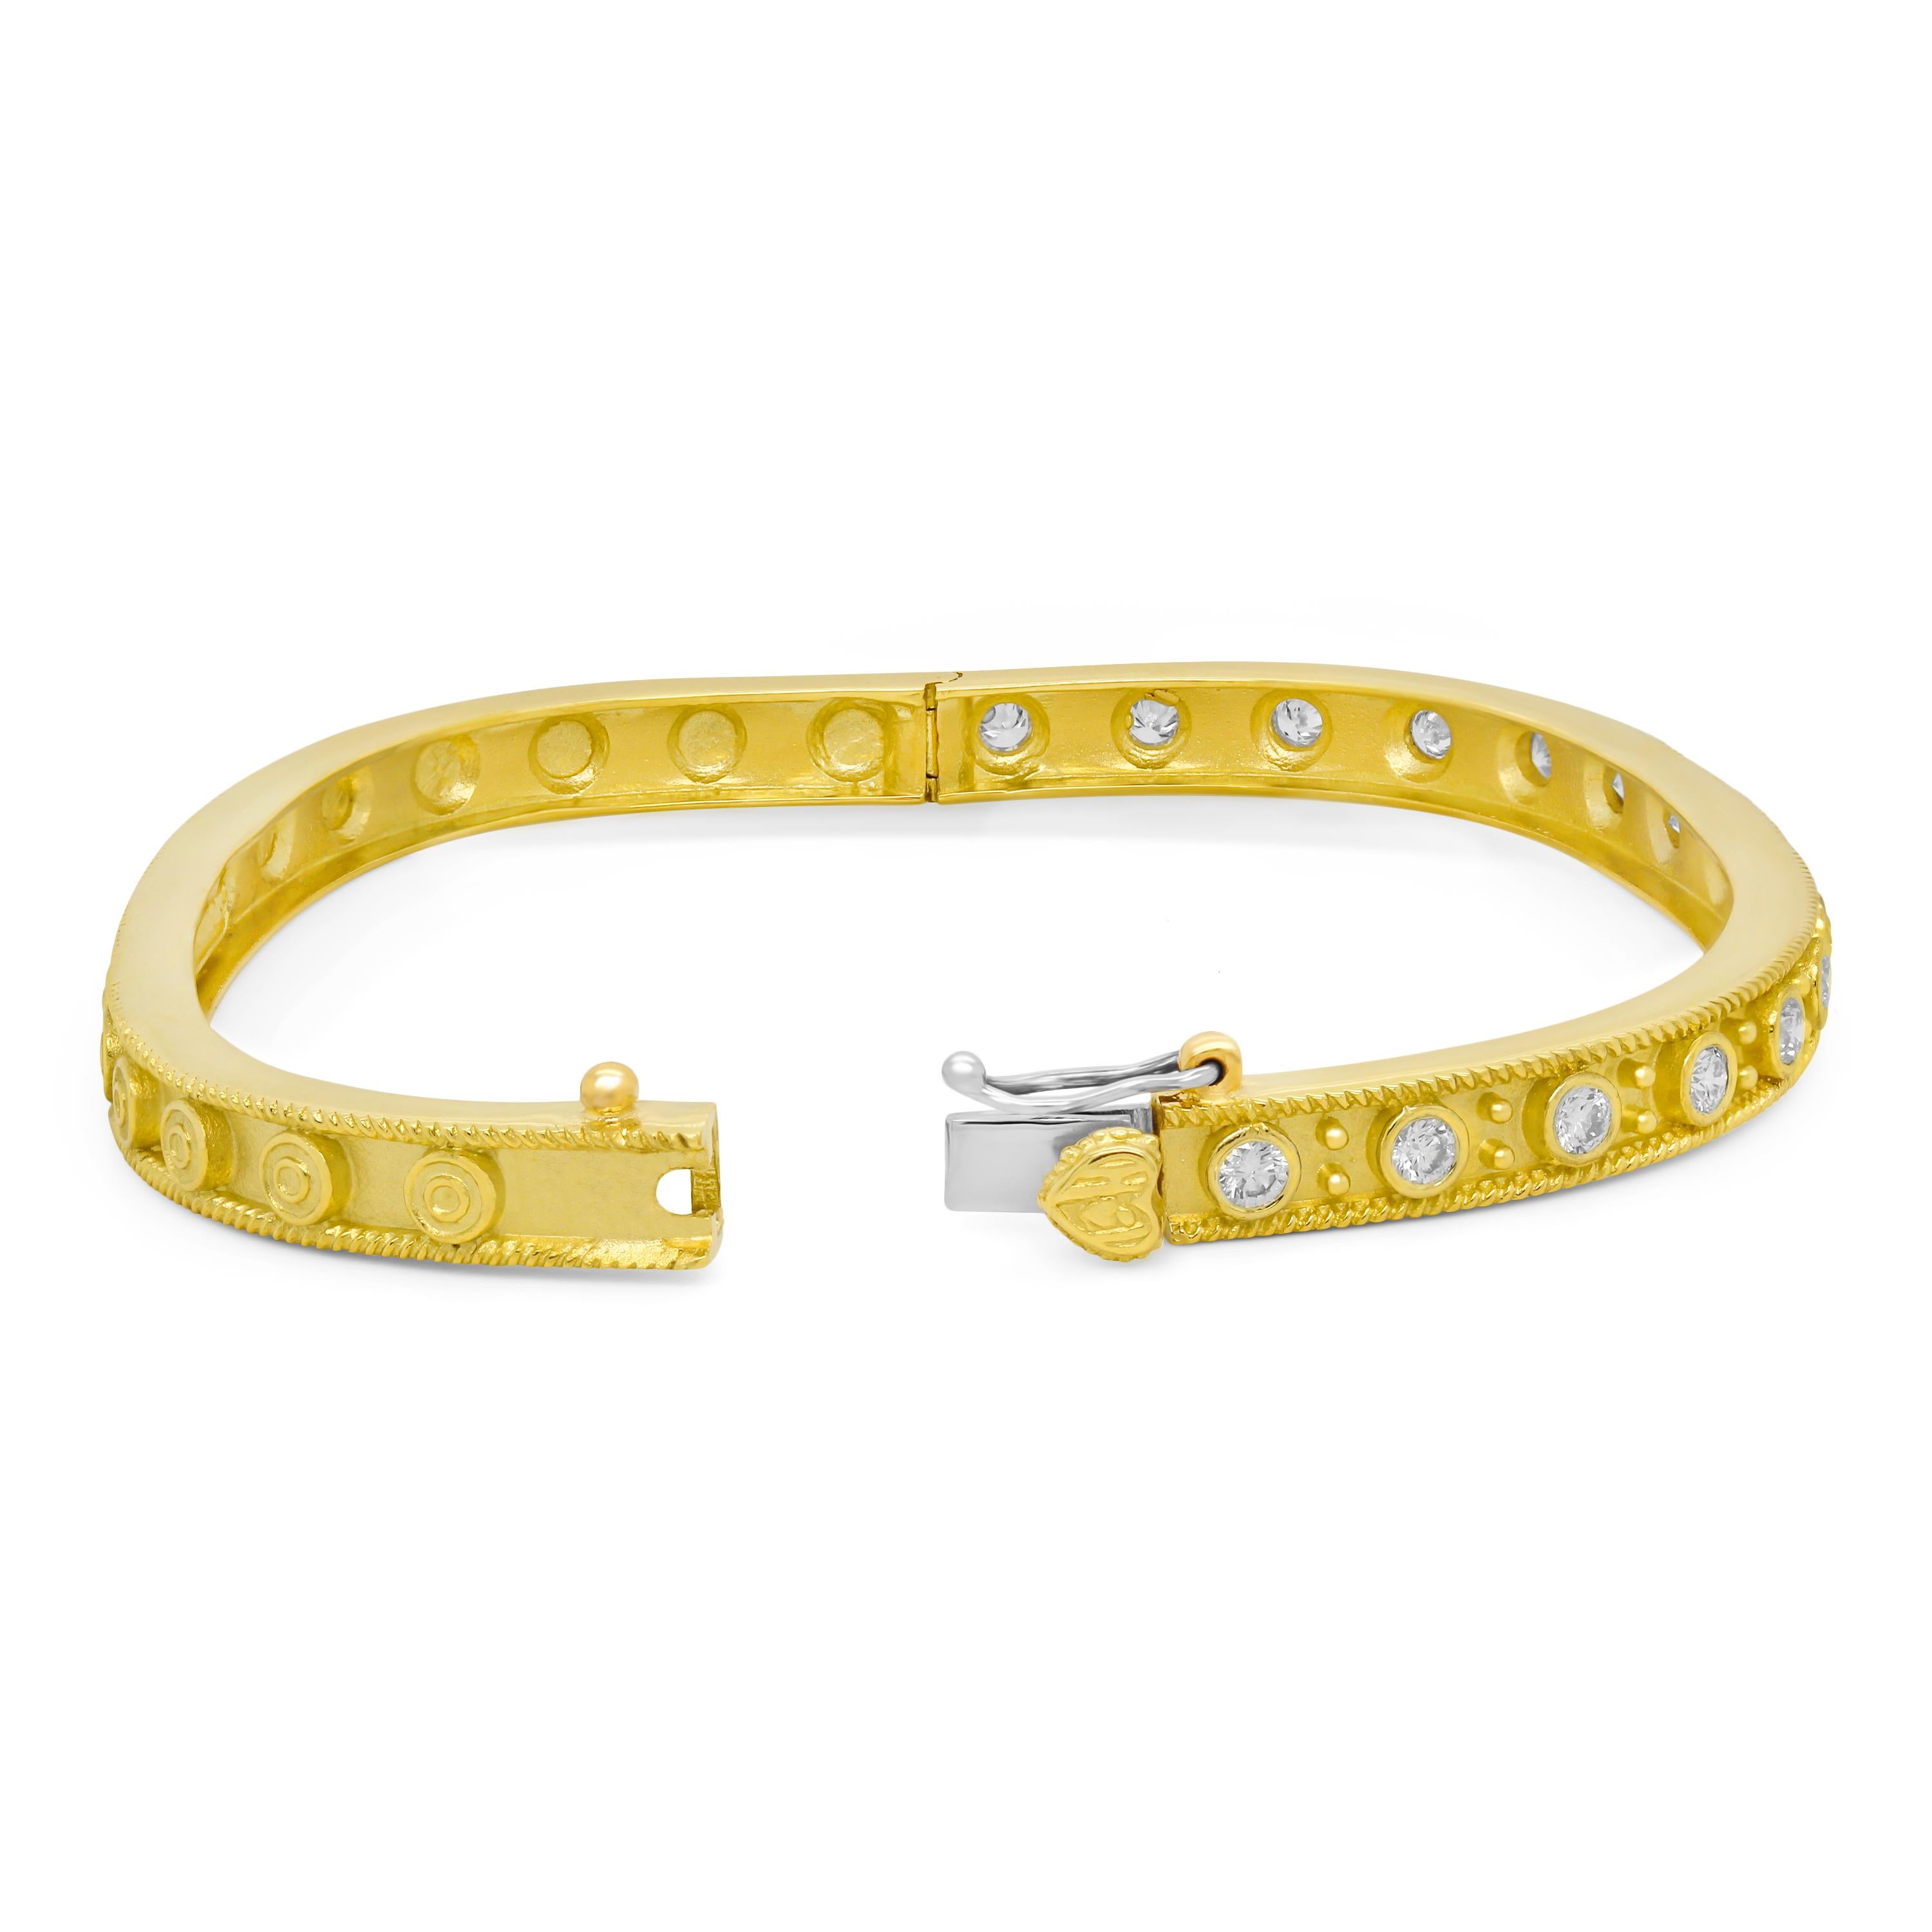 Stambolian 18K Gold Diamonds Square Bangle Bracelet

This stunning bangle is perfect for a stackable and features sixteen diamonds, bezel set all across one side of the piece

0.82 carat apprx. G color, VS clarity diamonds

Bangle comes standard in